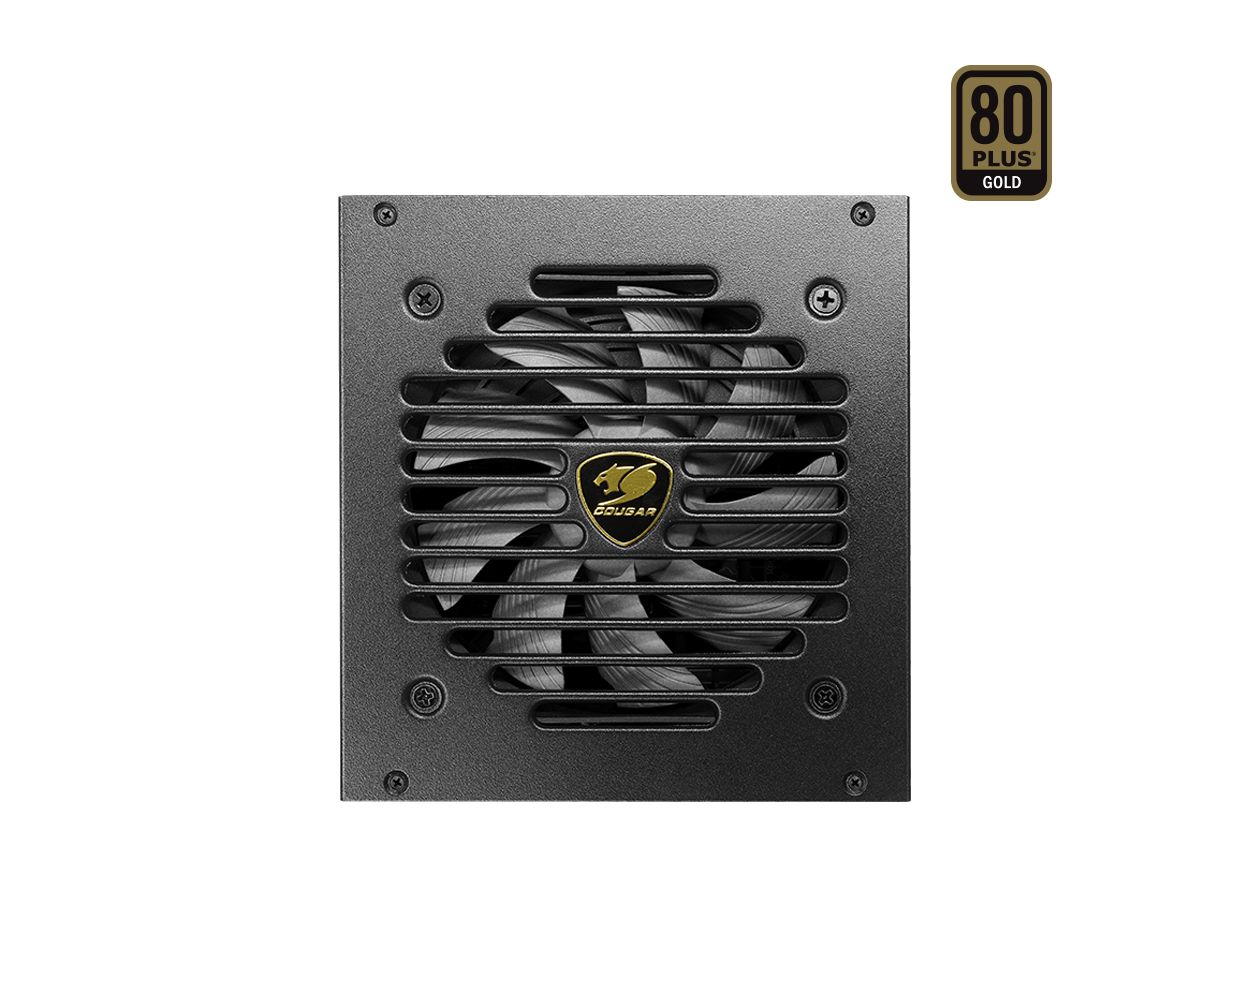 Cougar%20GEX750%20750W%20Power%20Supply%20(80%20Plus%20Gold)